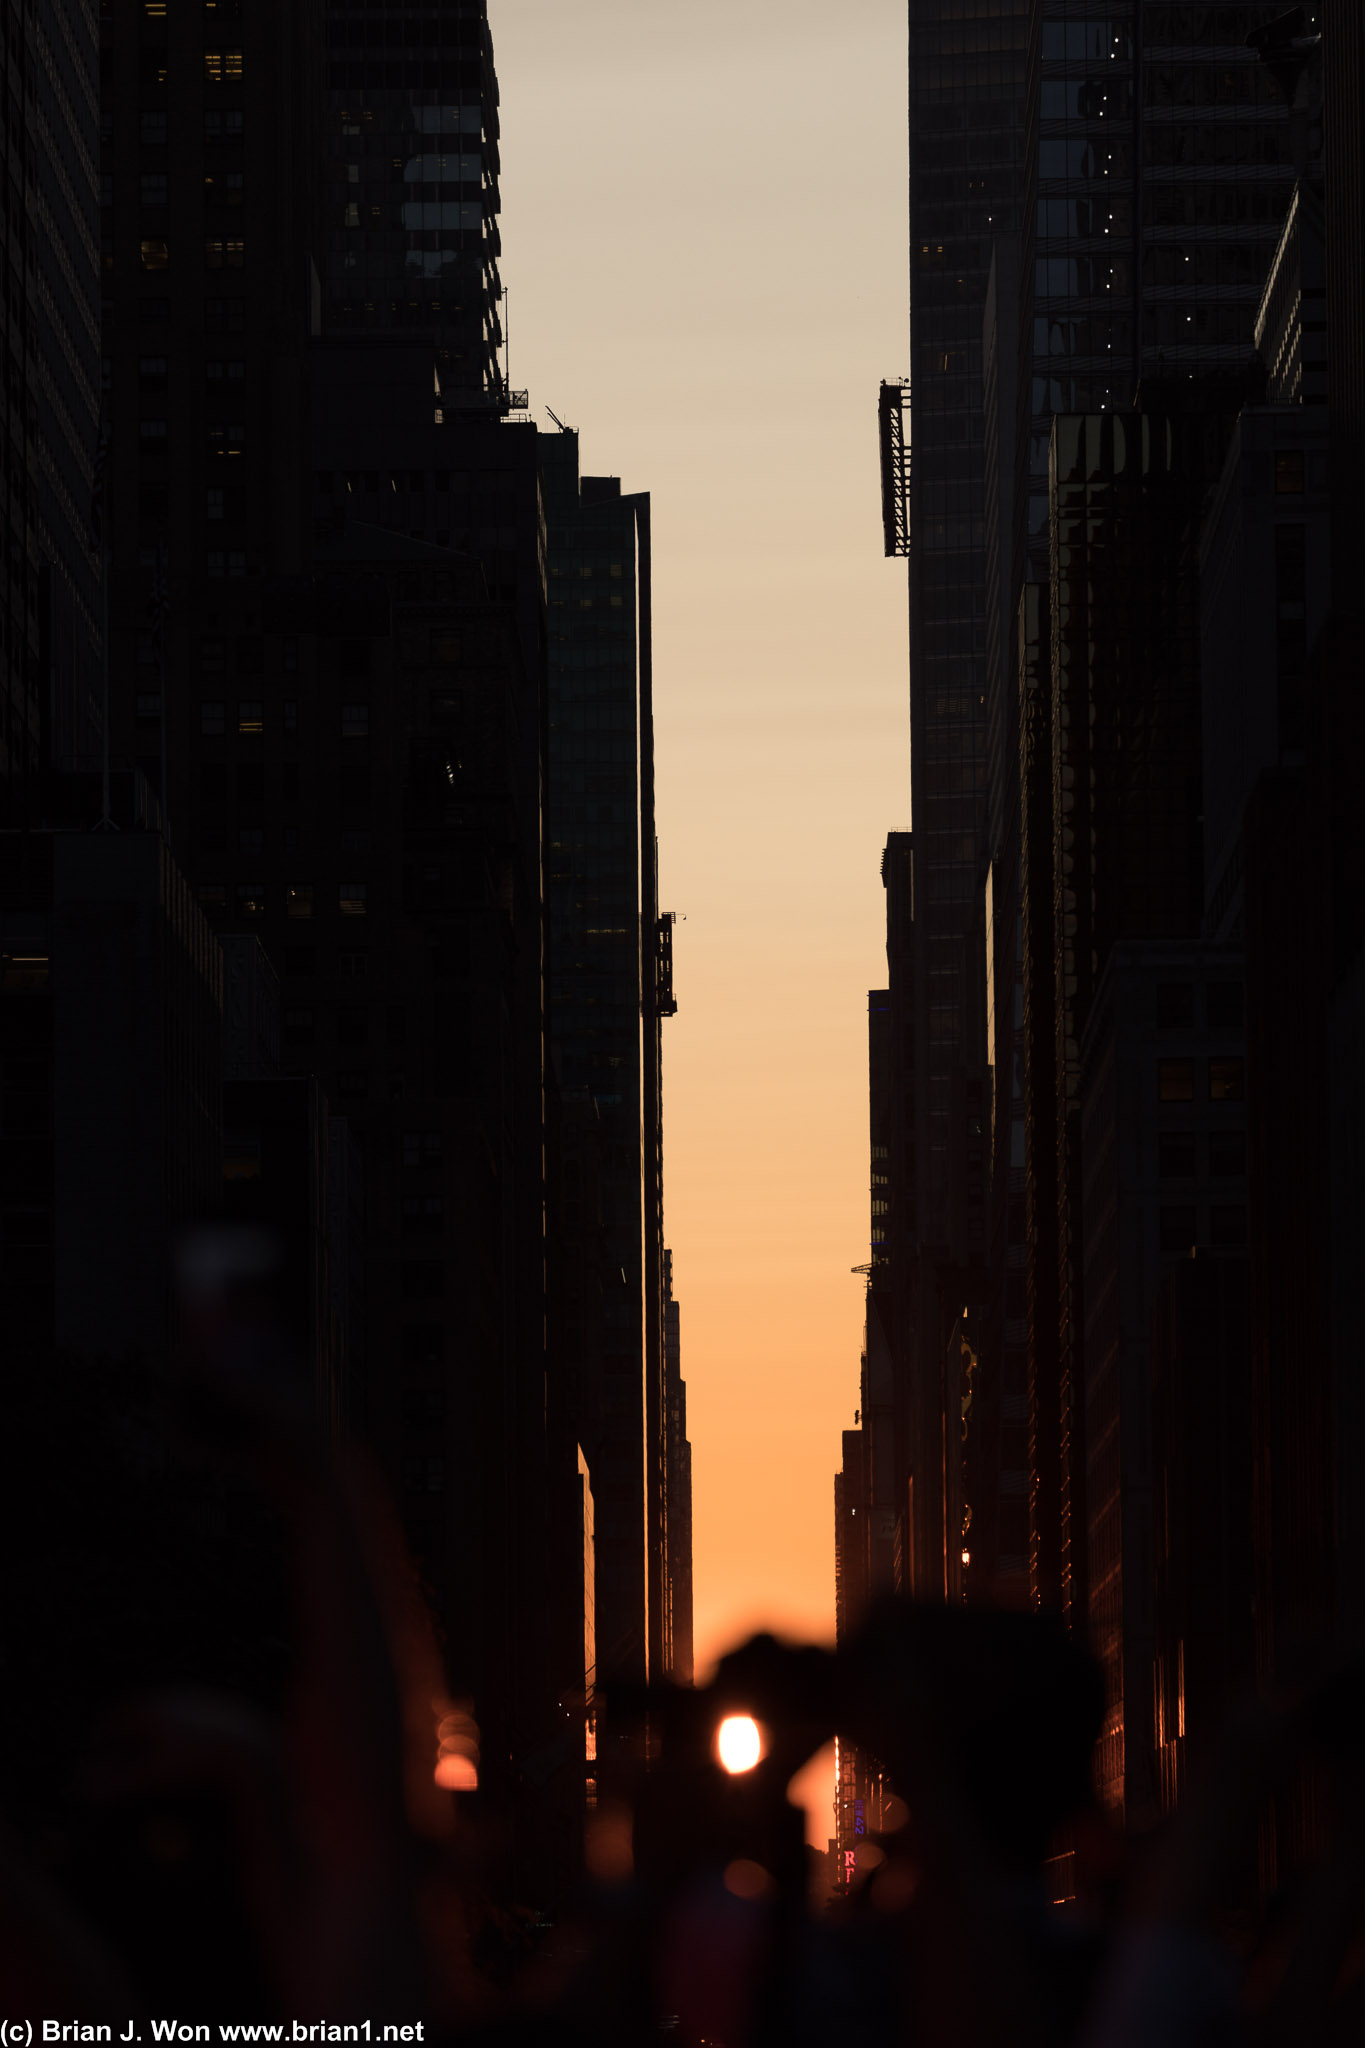 So many people waiting for Manhattanhenge, you can't even get a clear shot of the sun.